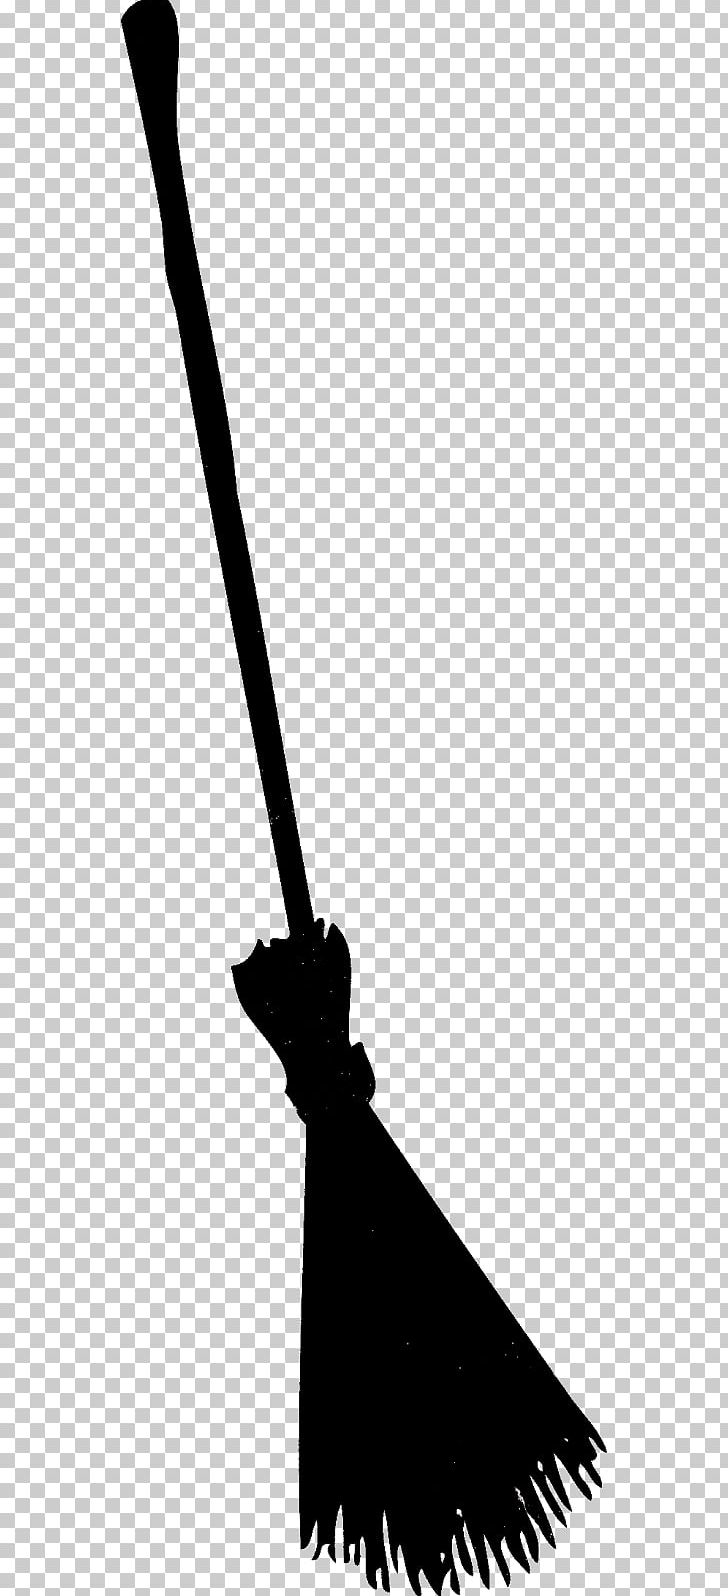 Broom Silhouette PNG, Clipart, Broom, Clip Art, Silhouette Free PNG Download